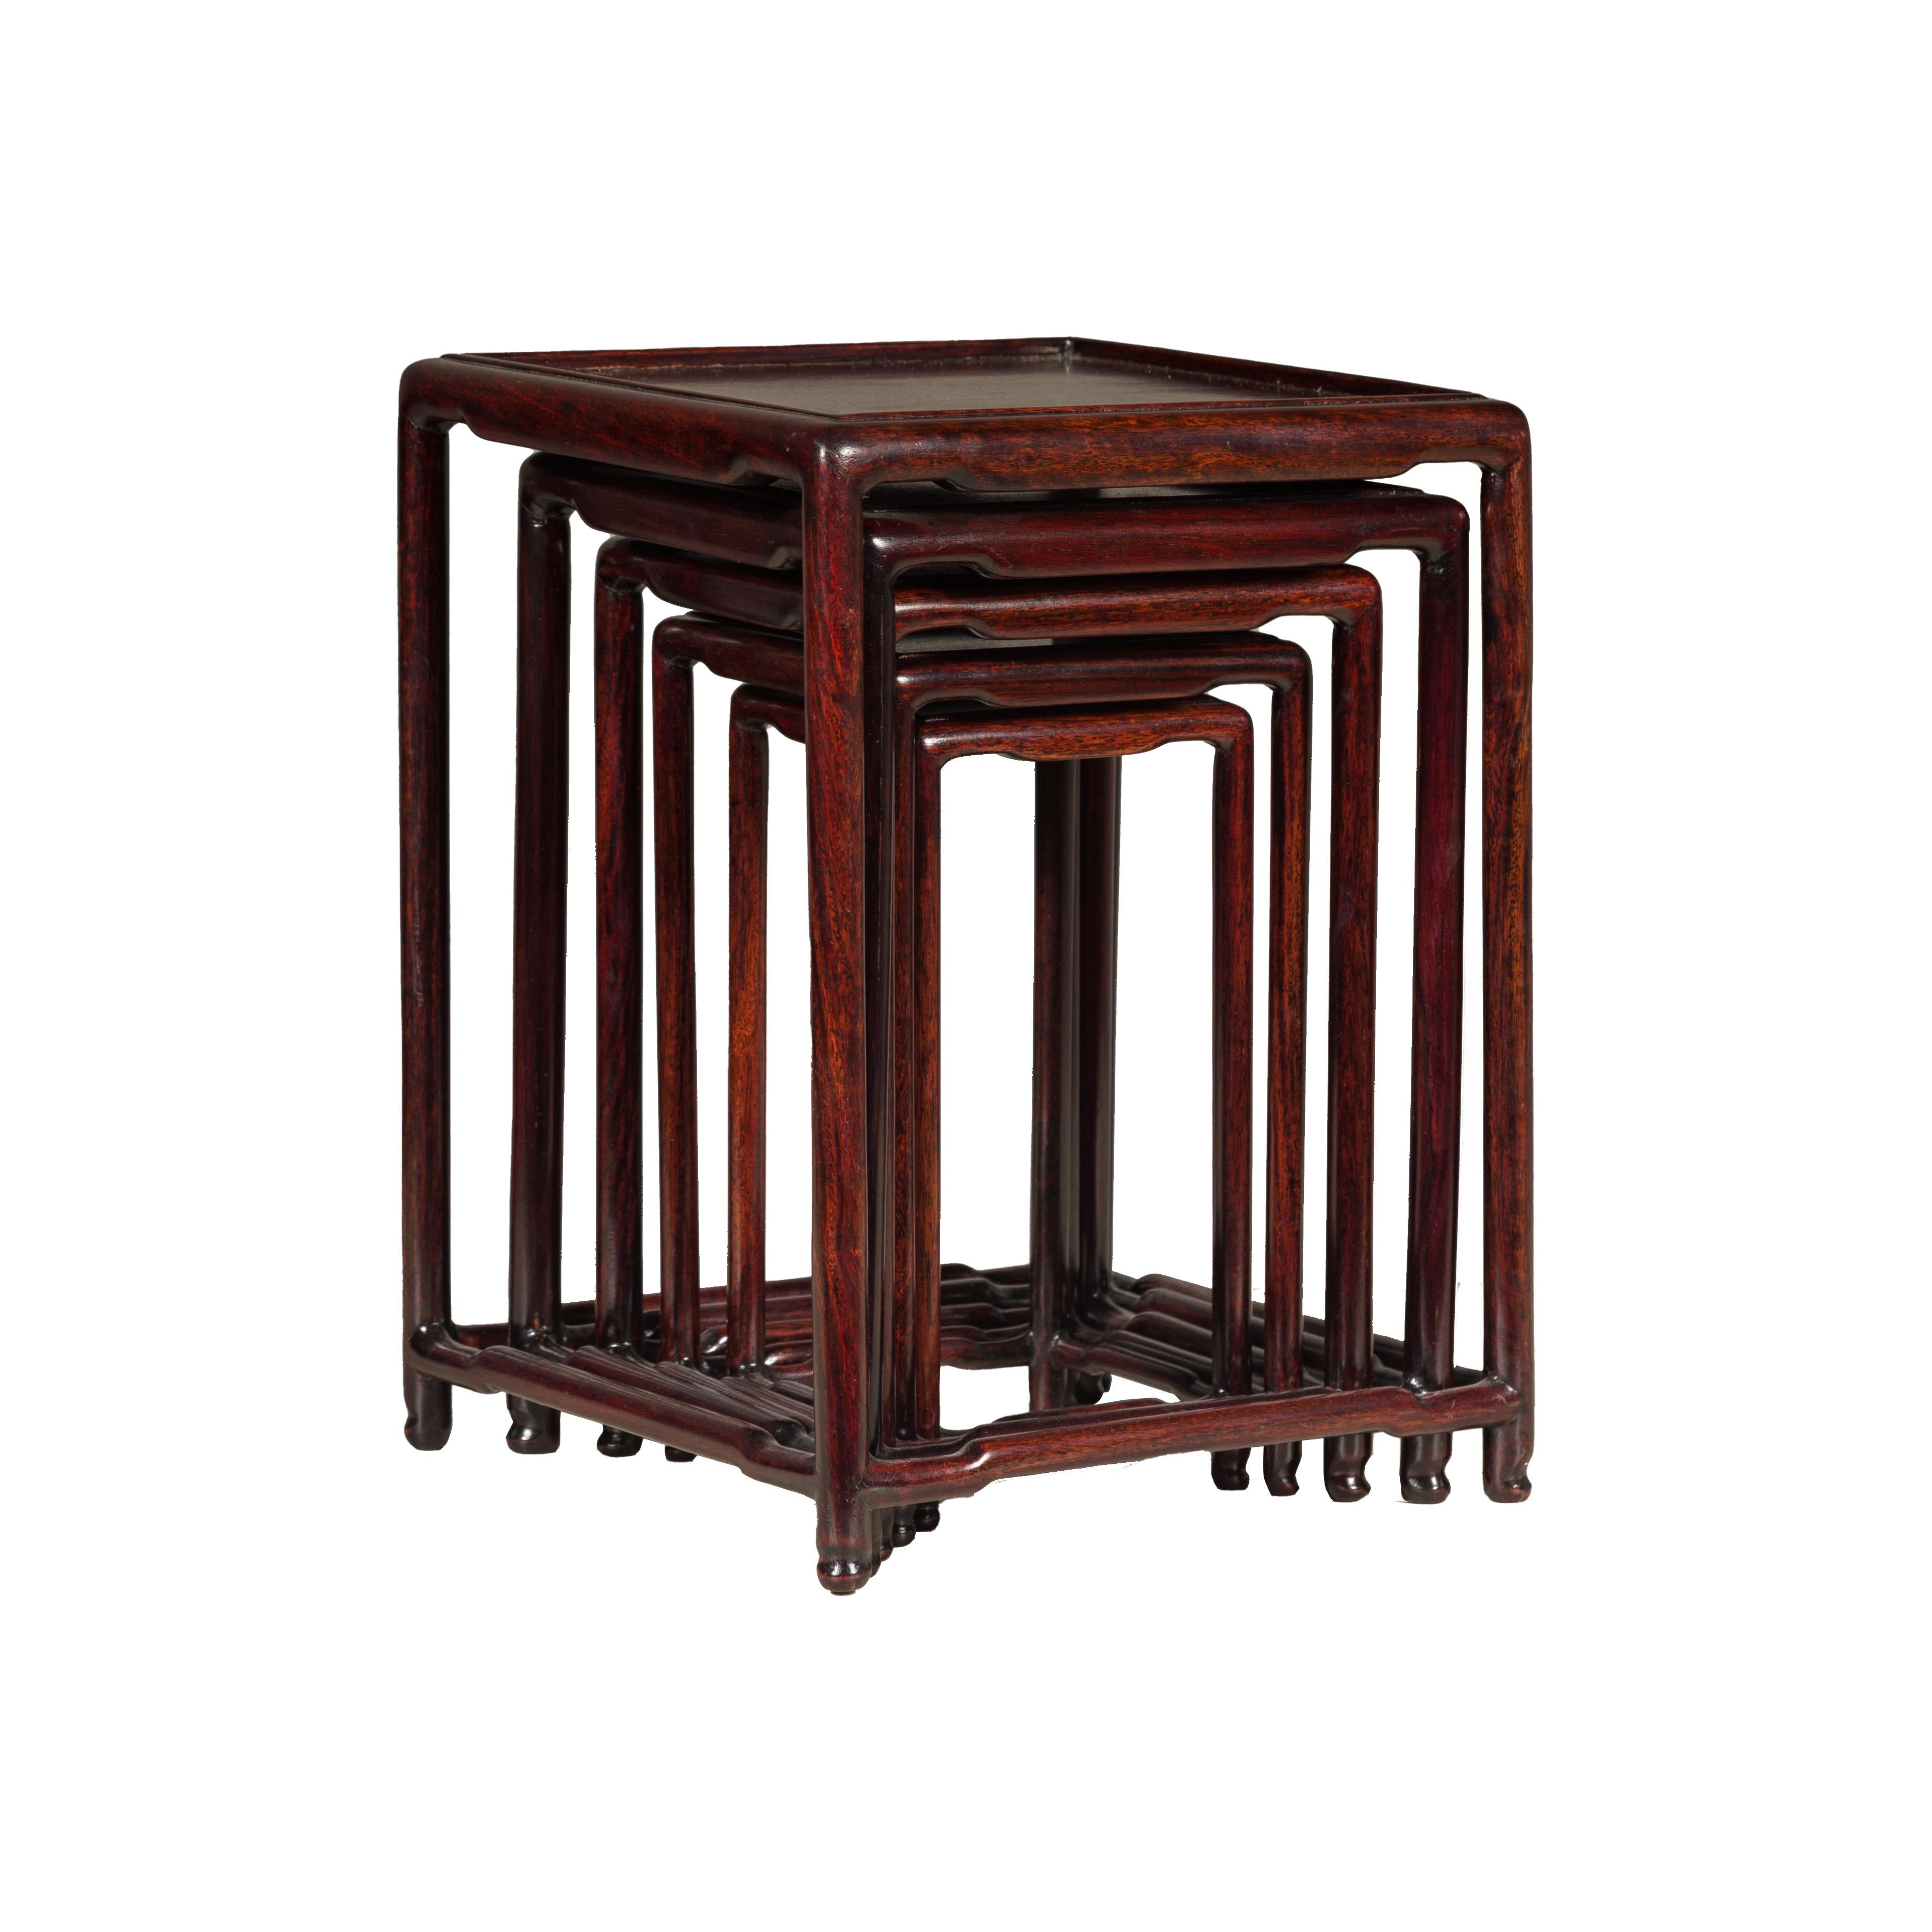 Set of Five Small Size Rosewood Nesting Tables with Humpback Stretchers For Sale 8